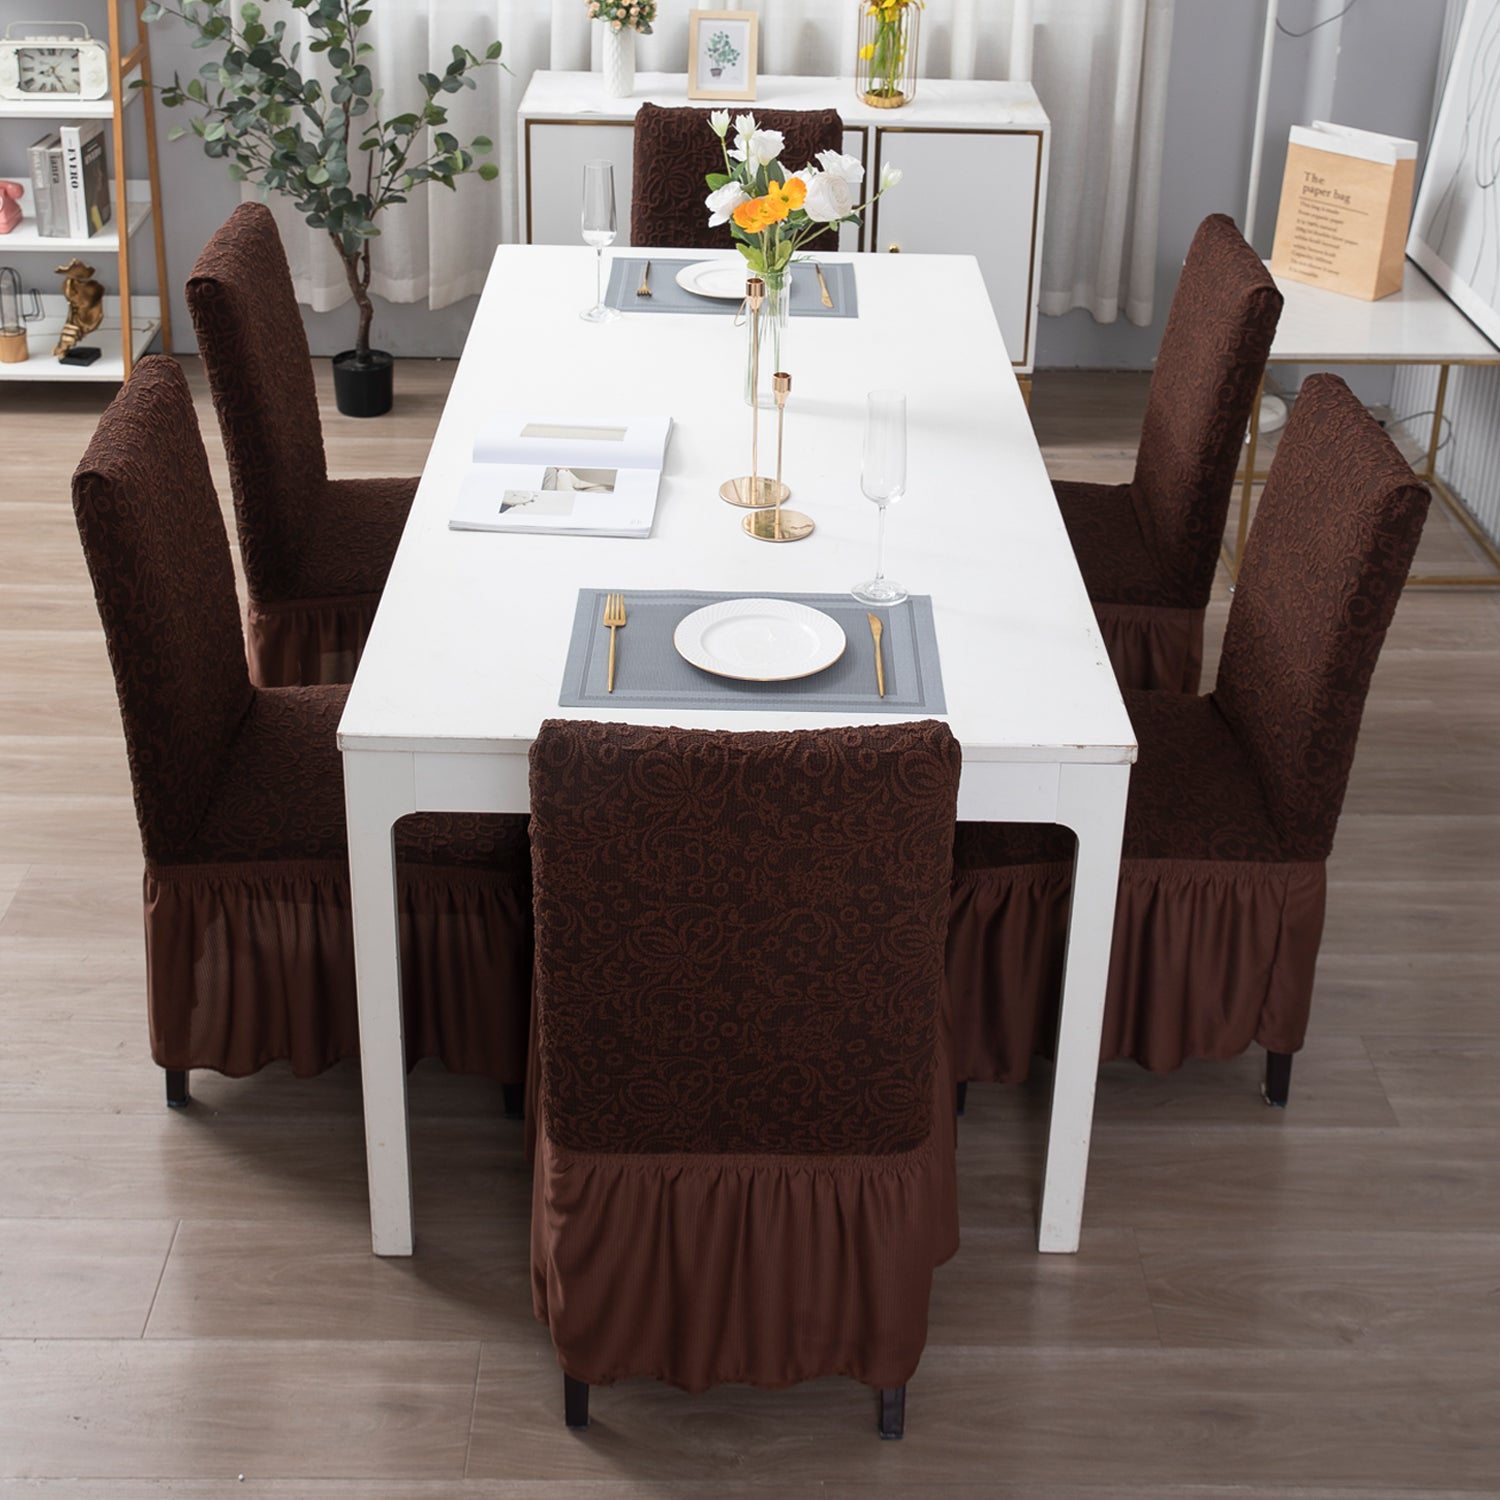 Elastic Stretchable Designer Woven Jacquard Dining Chair Cover with Frill, Pecan Brown